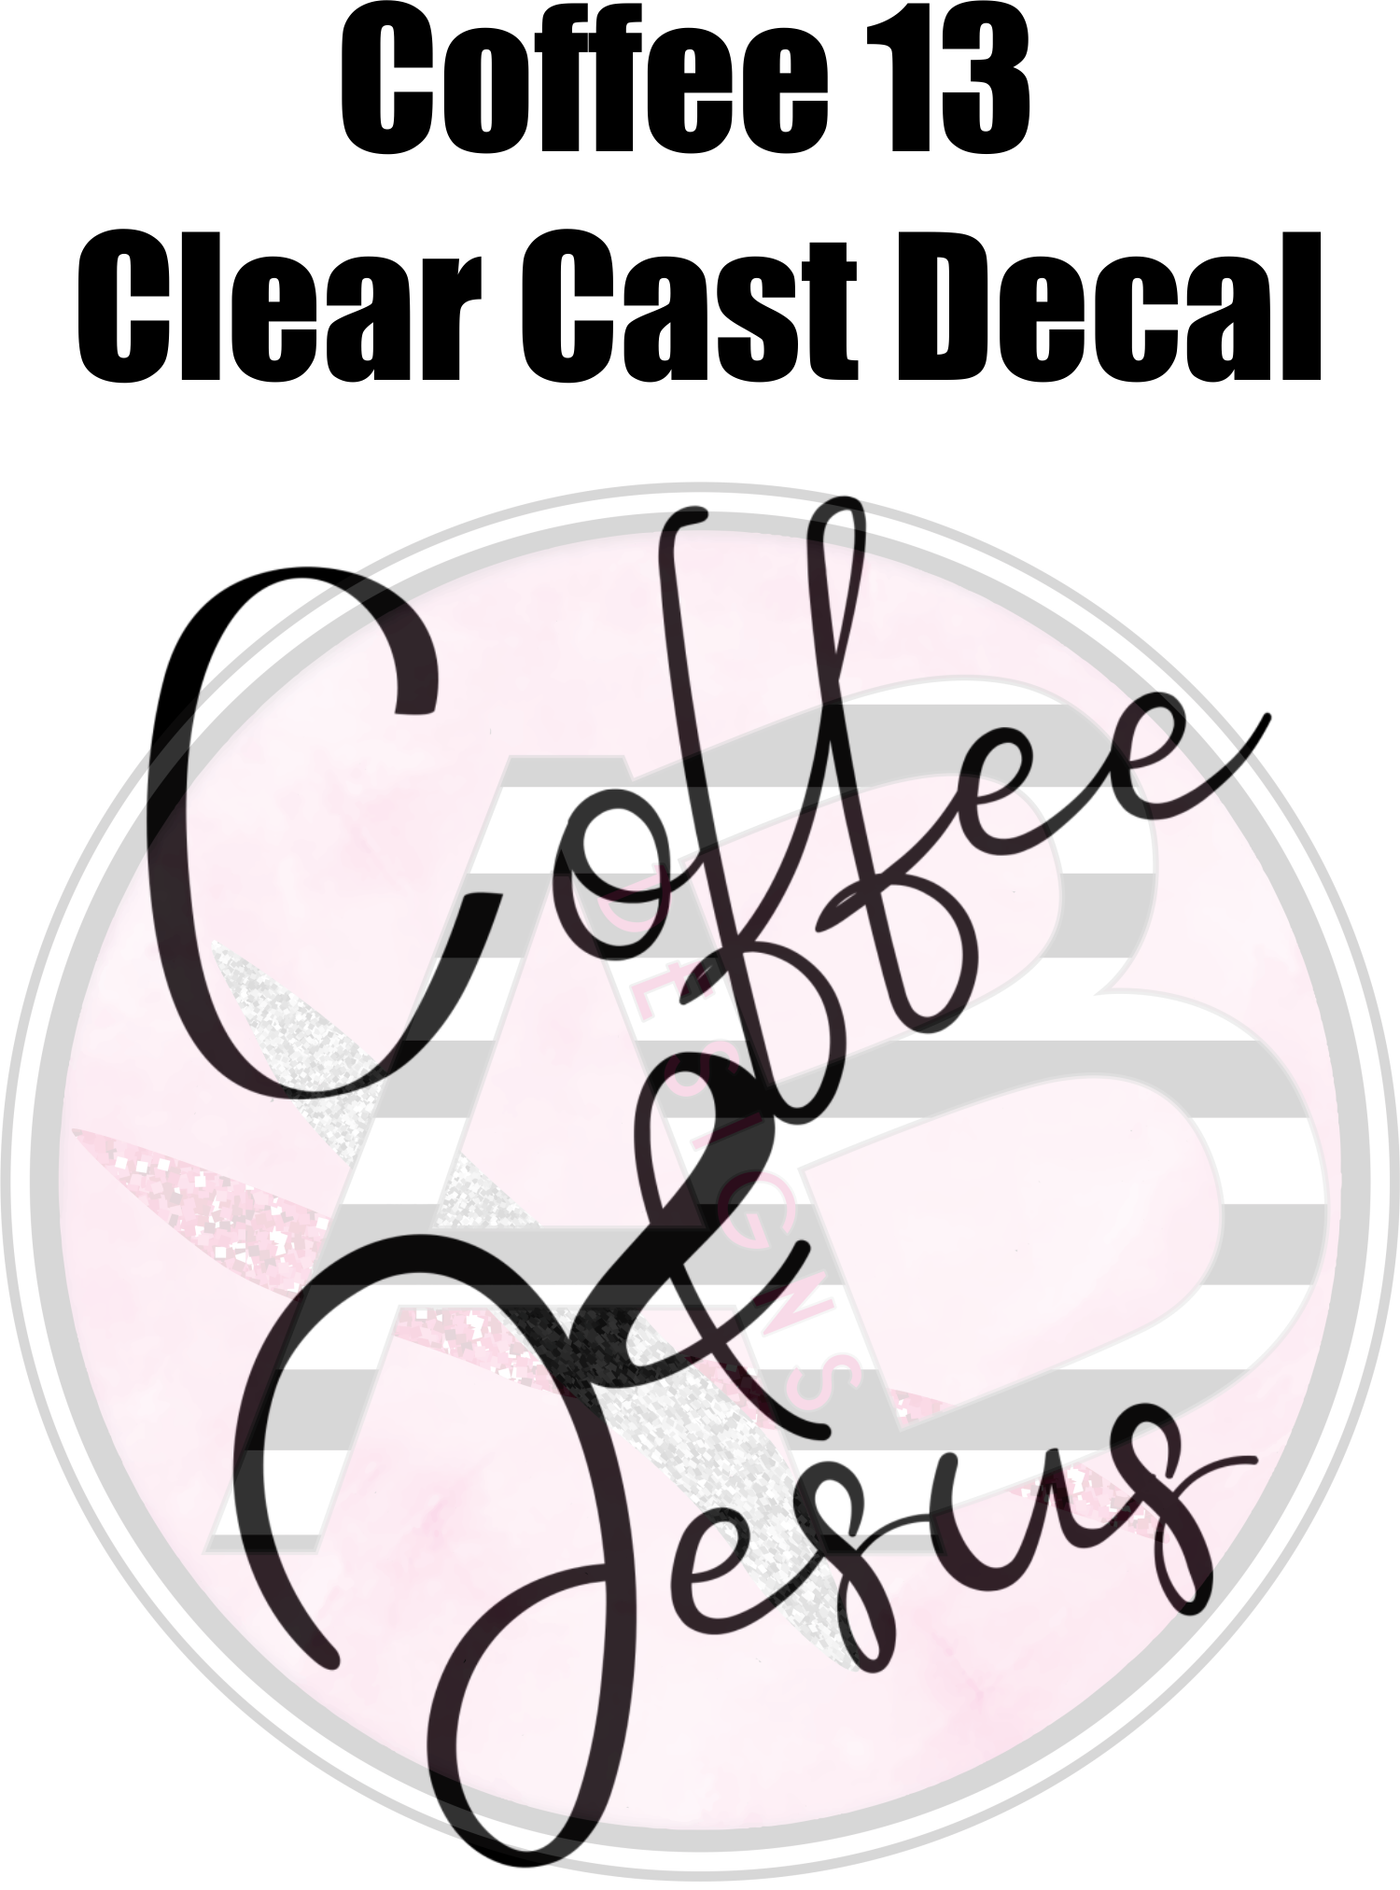 Coffee 13 - Clear Cast Decal